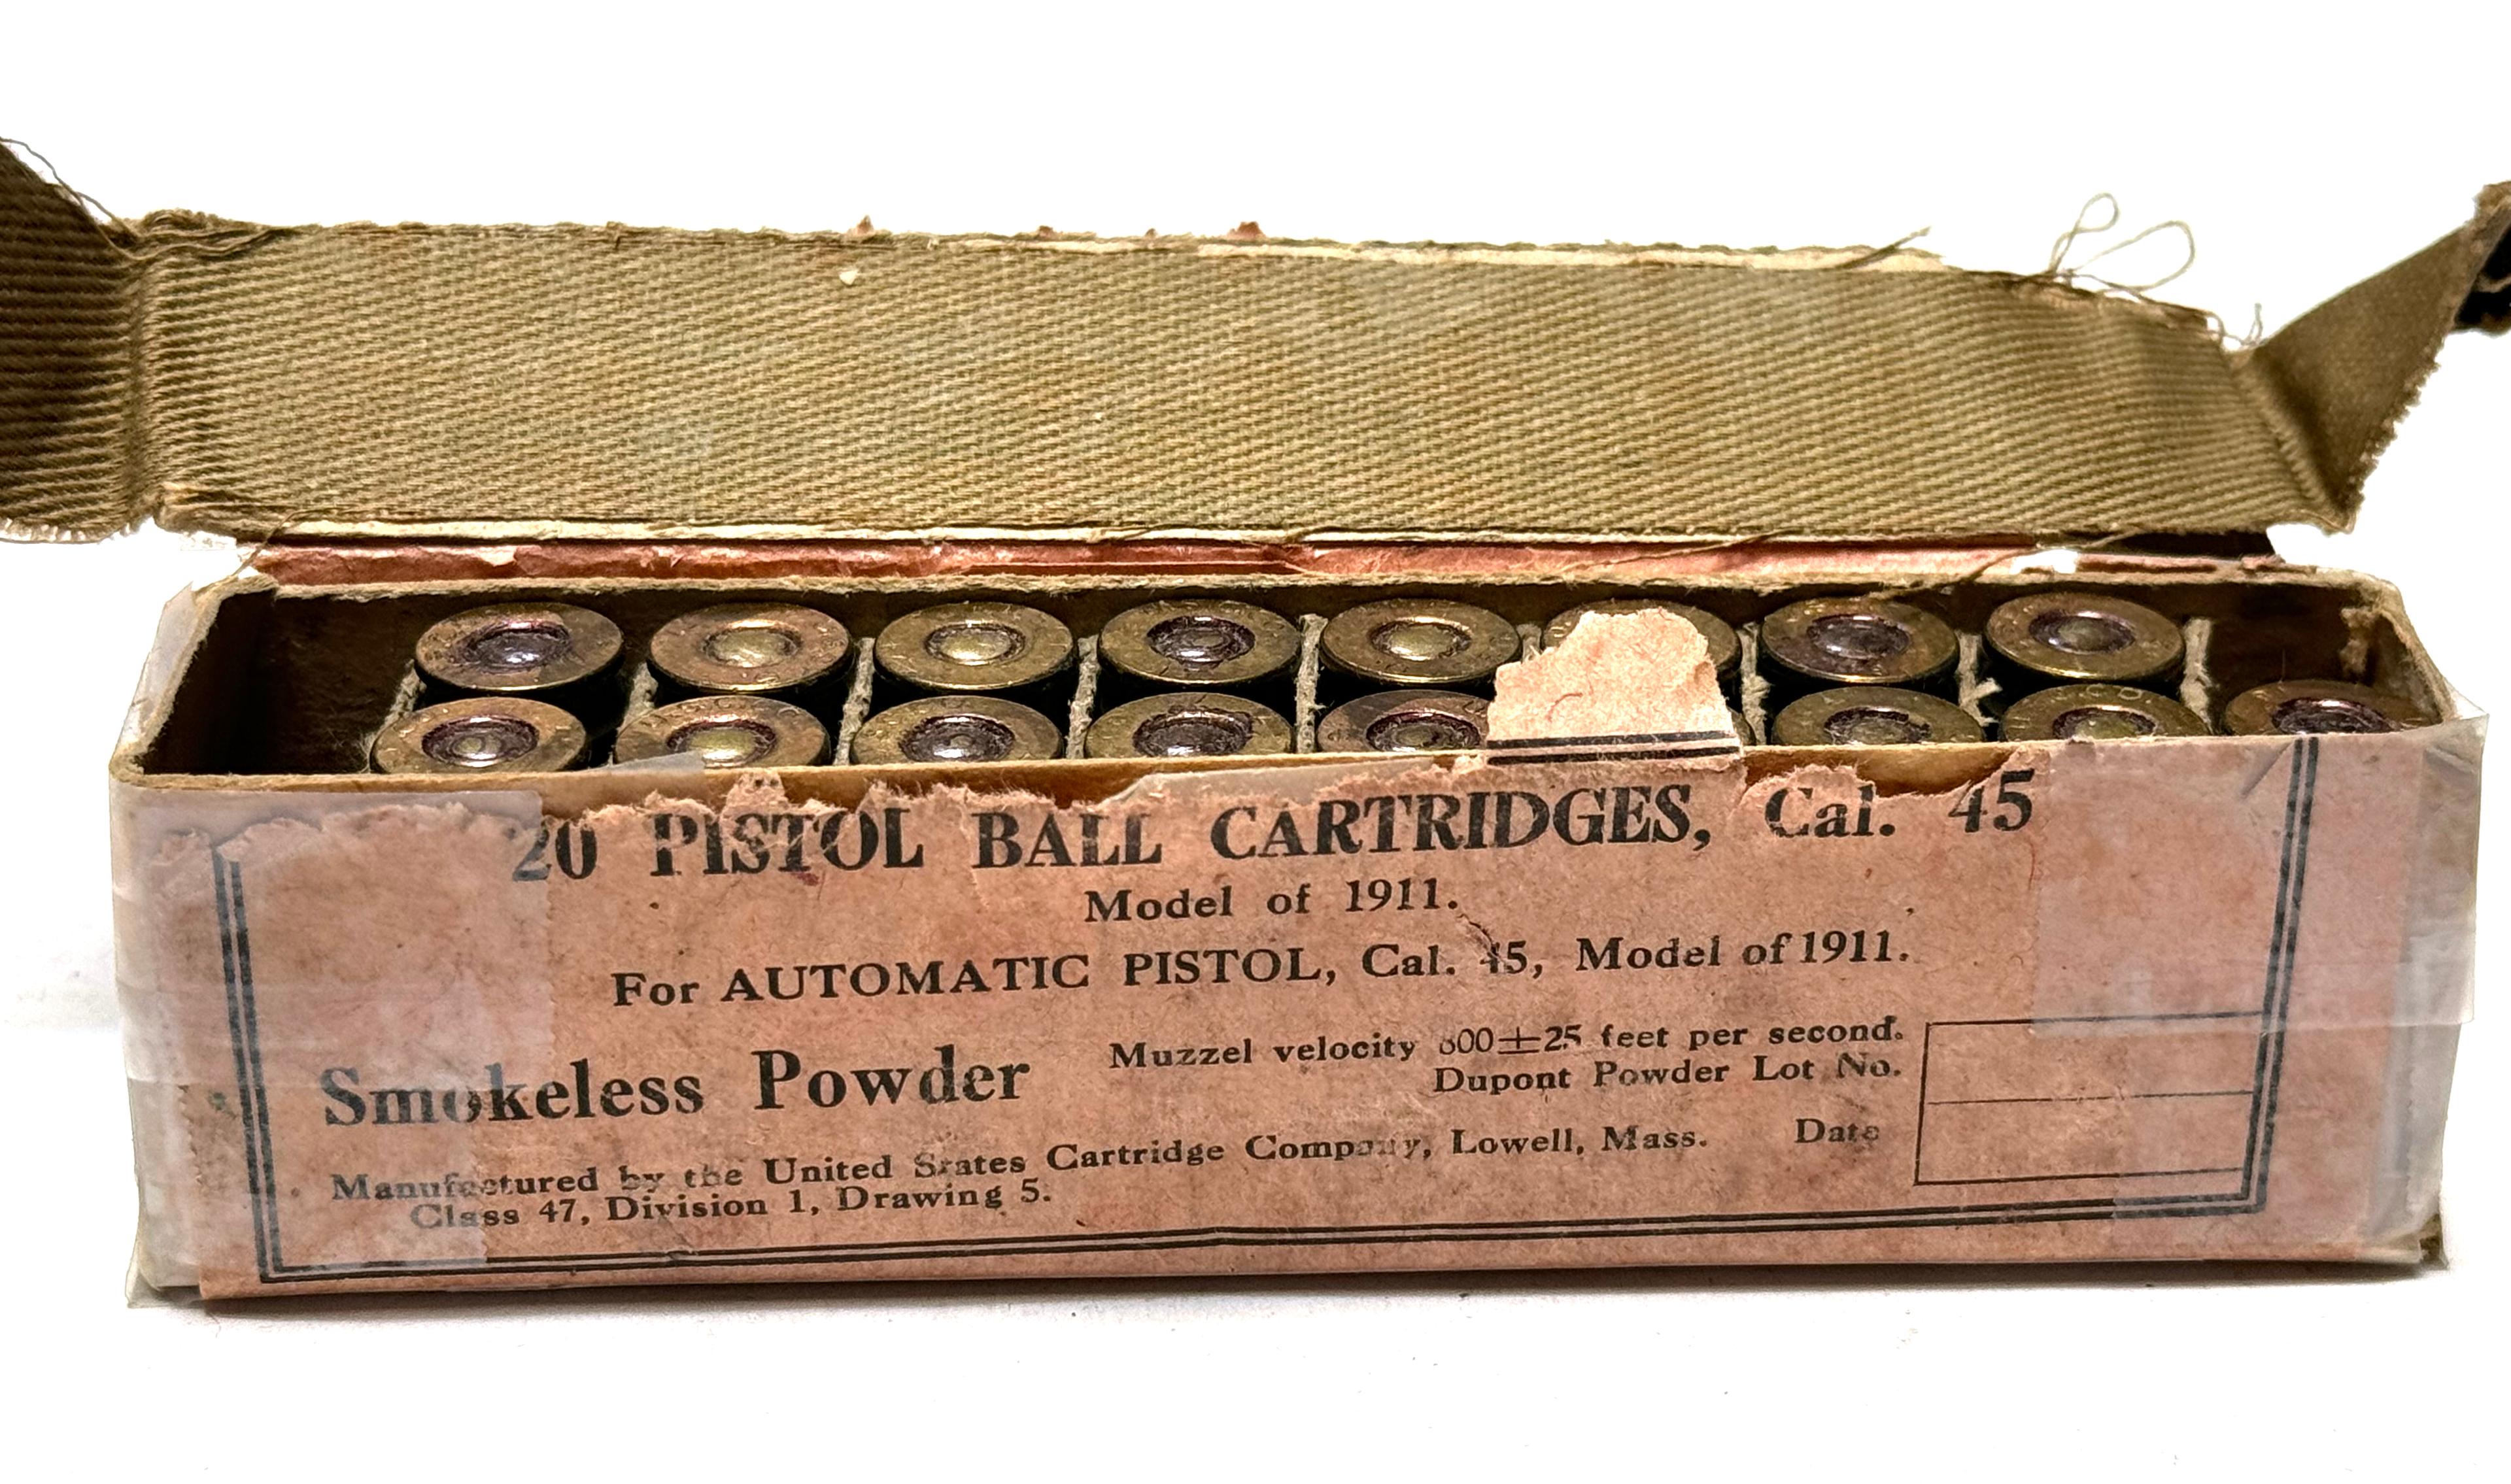 17rds. of 1917 US WWI Pistol Ball .45 Caliber Model of 1911 Ammunition by US Cartridge Co.